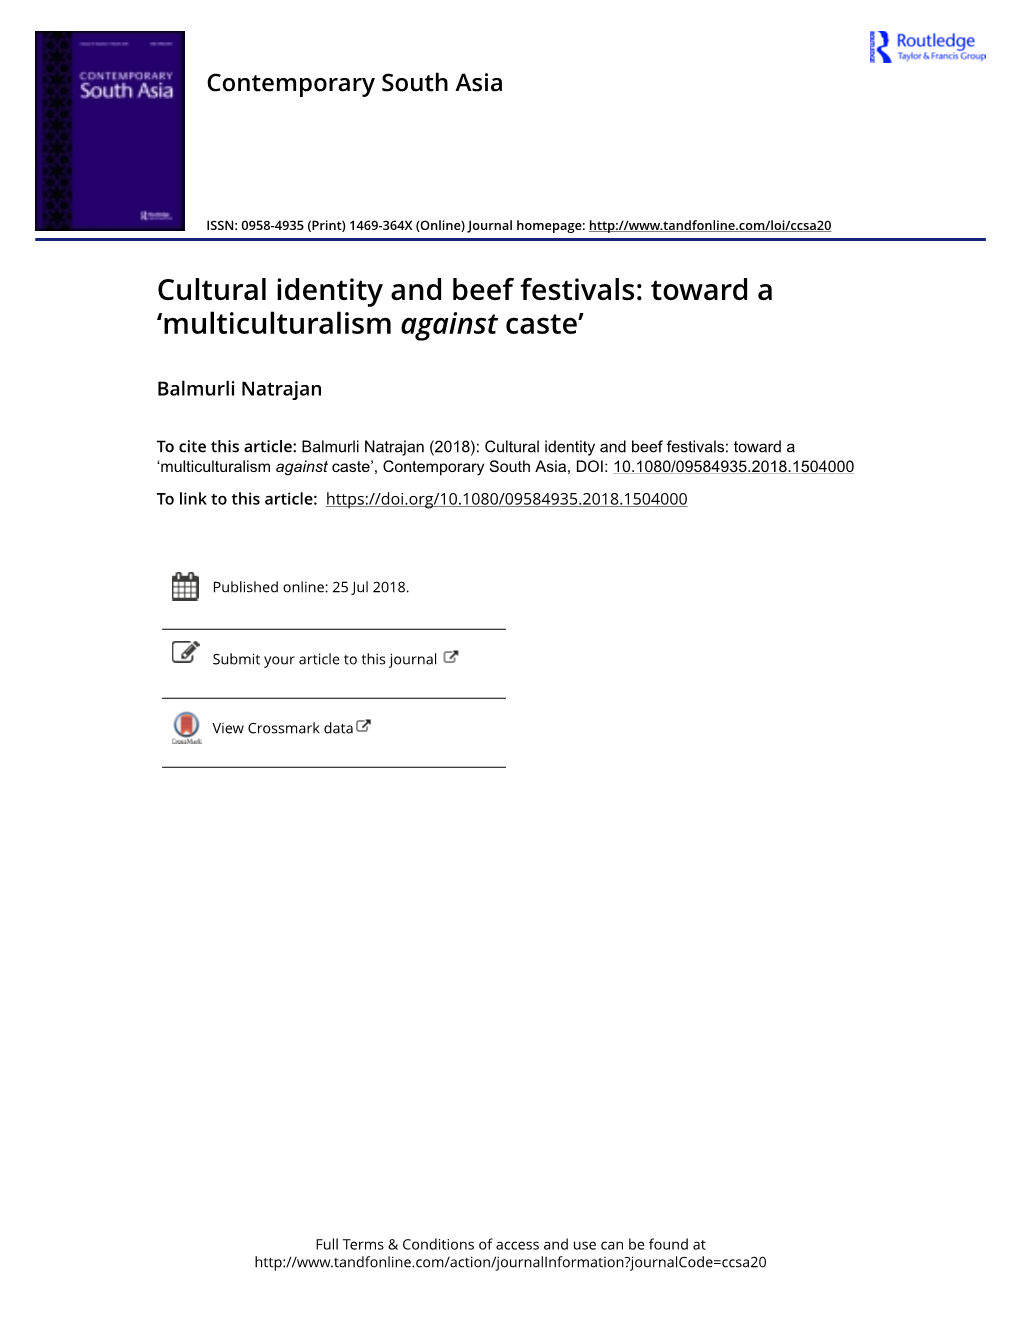 Cultural Identity and Beef Festivals: Toward a 'Multiculturalism Against